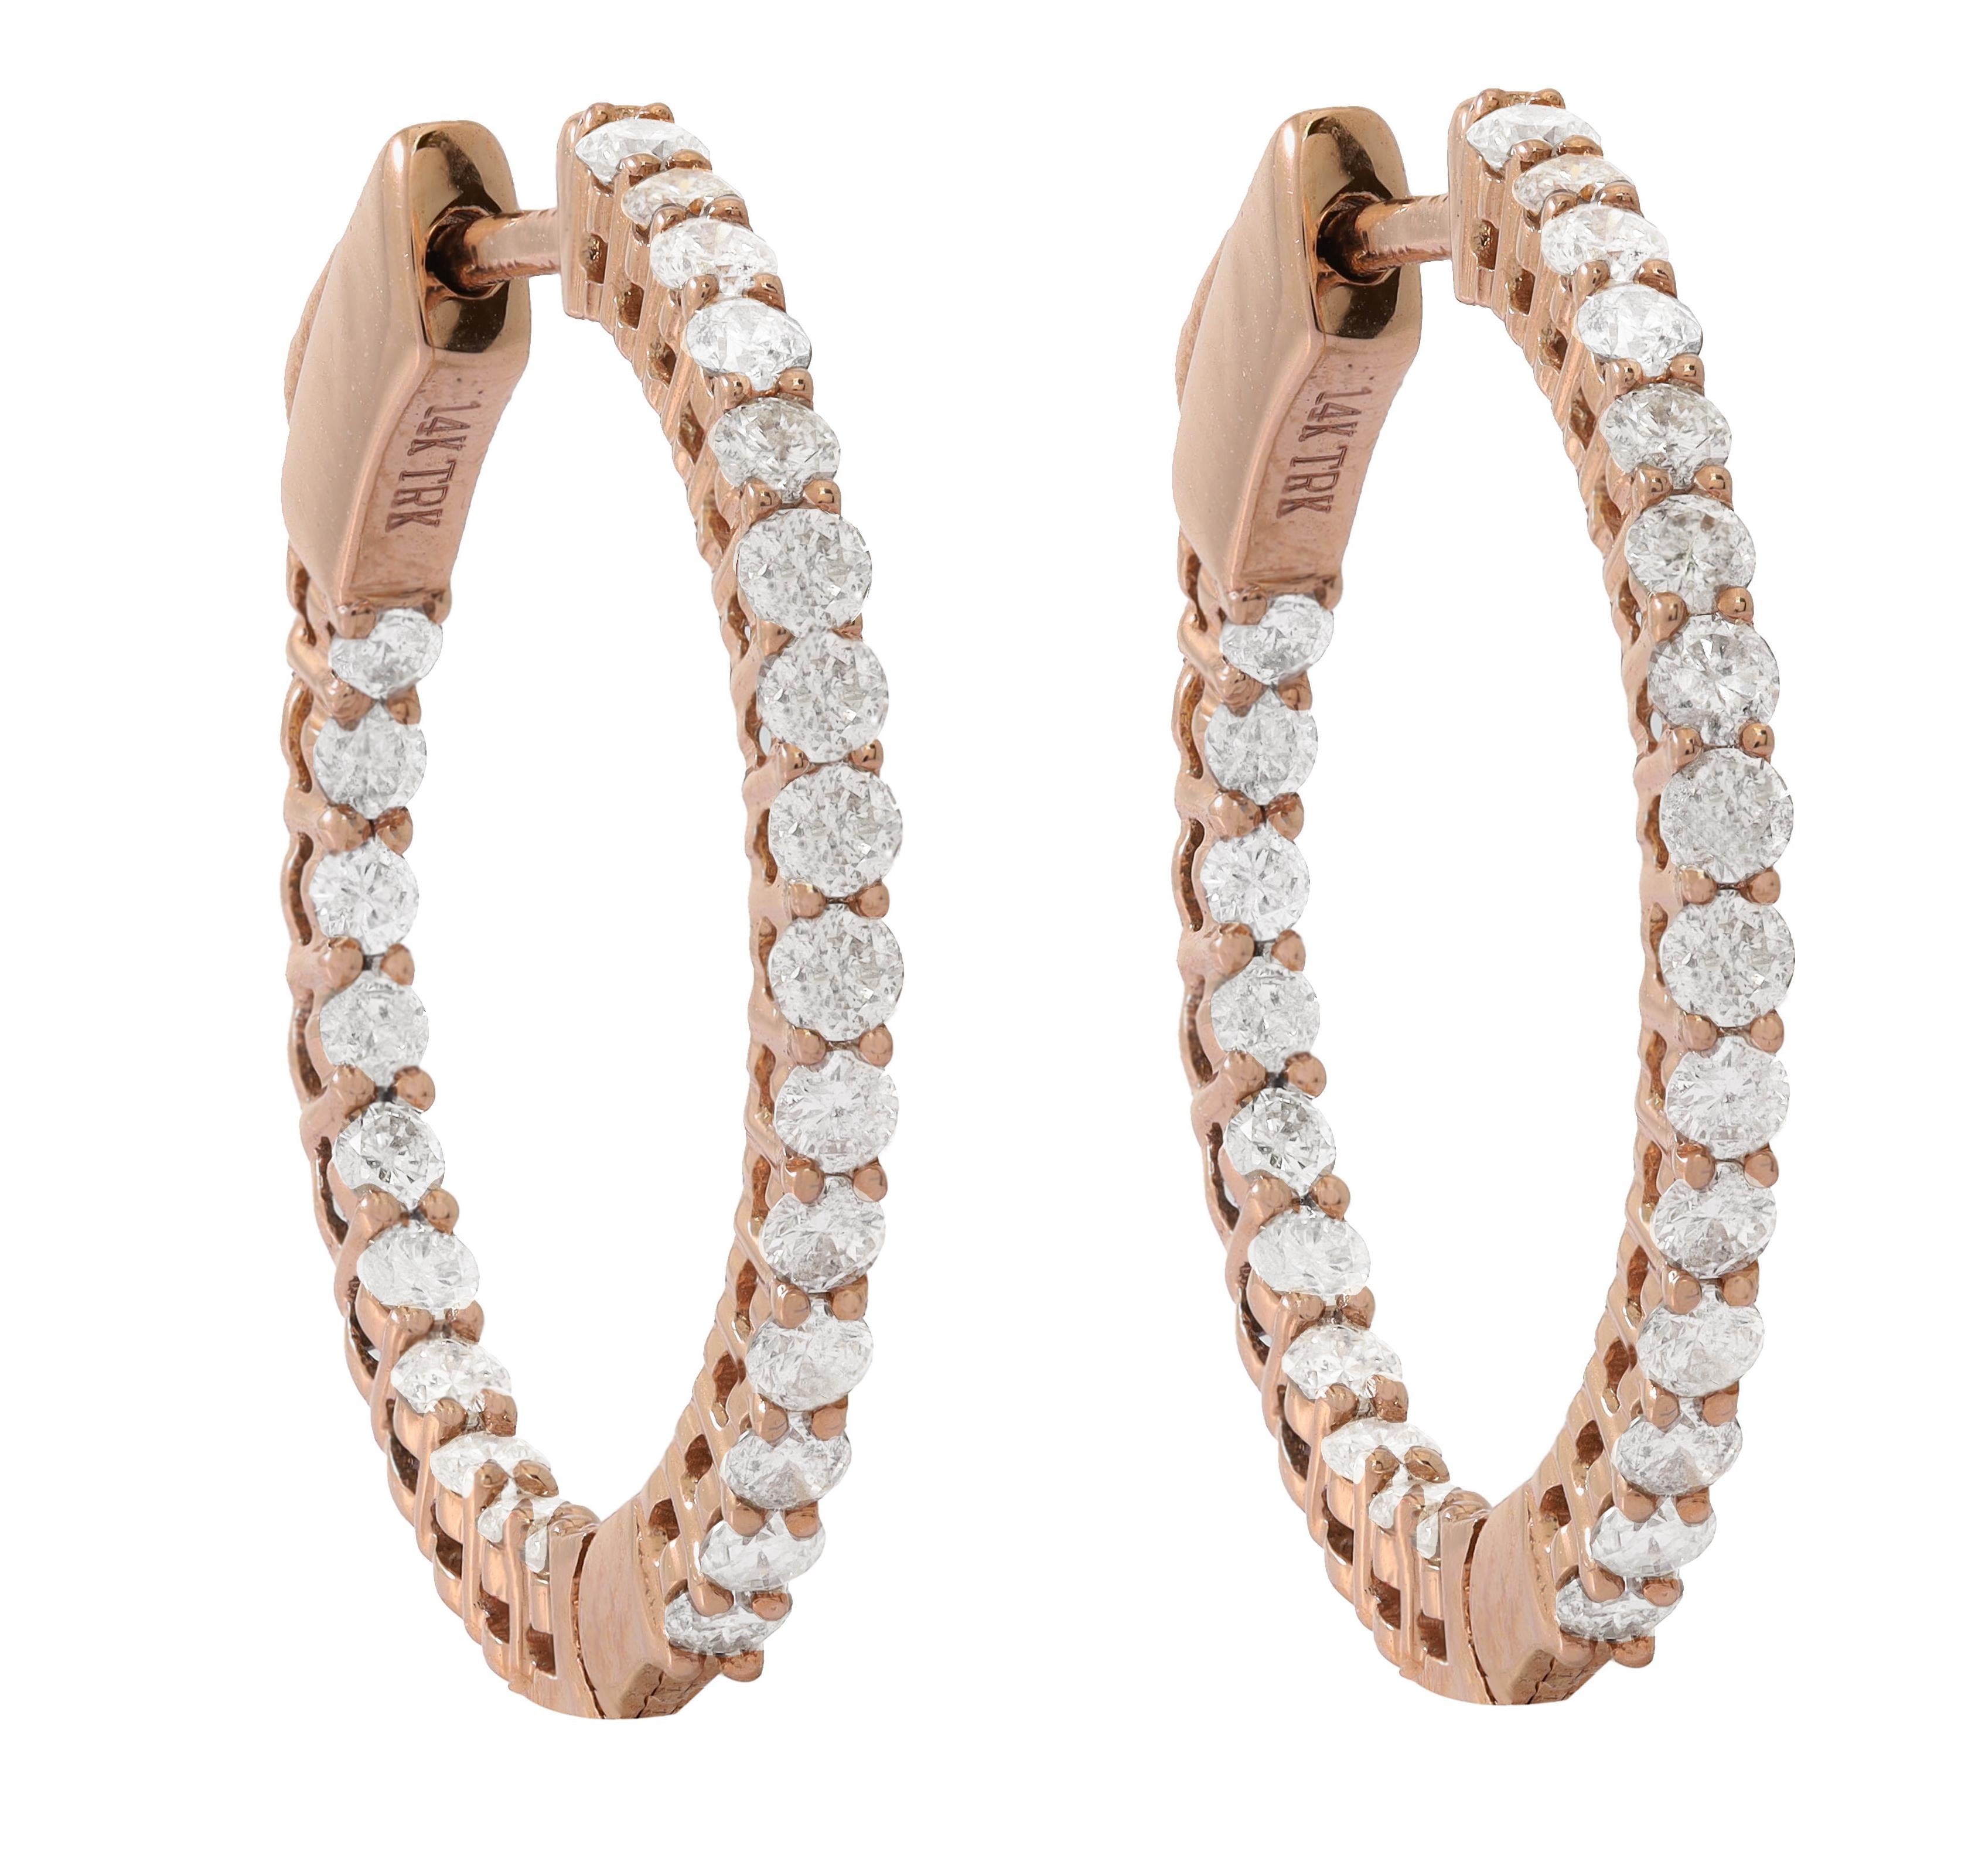 14K Rose Gold Diamond Earrings featuring 1.00 Carats of Diamonds

Underline your look with this sharp 14K Rose gold shape Diamond Earrings. High quality Diamonds. This Earrings will underline your exquisite look for any occasion.

. is a leading